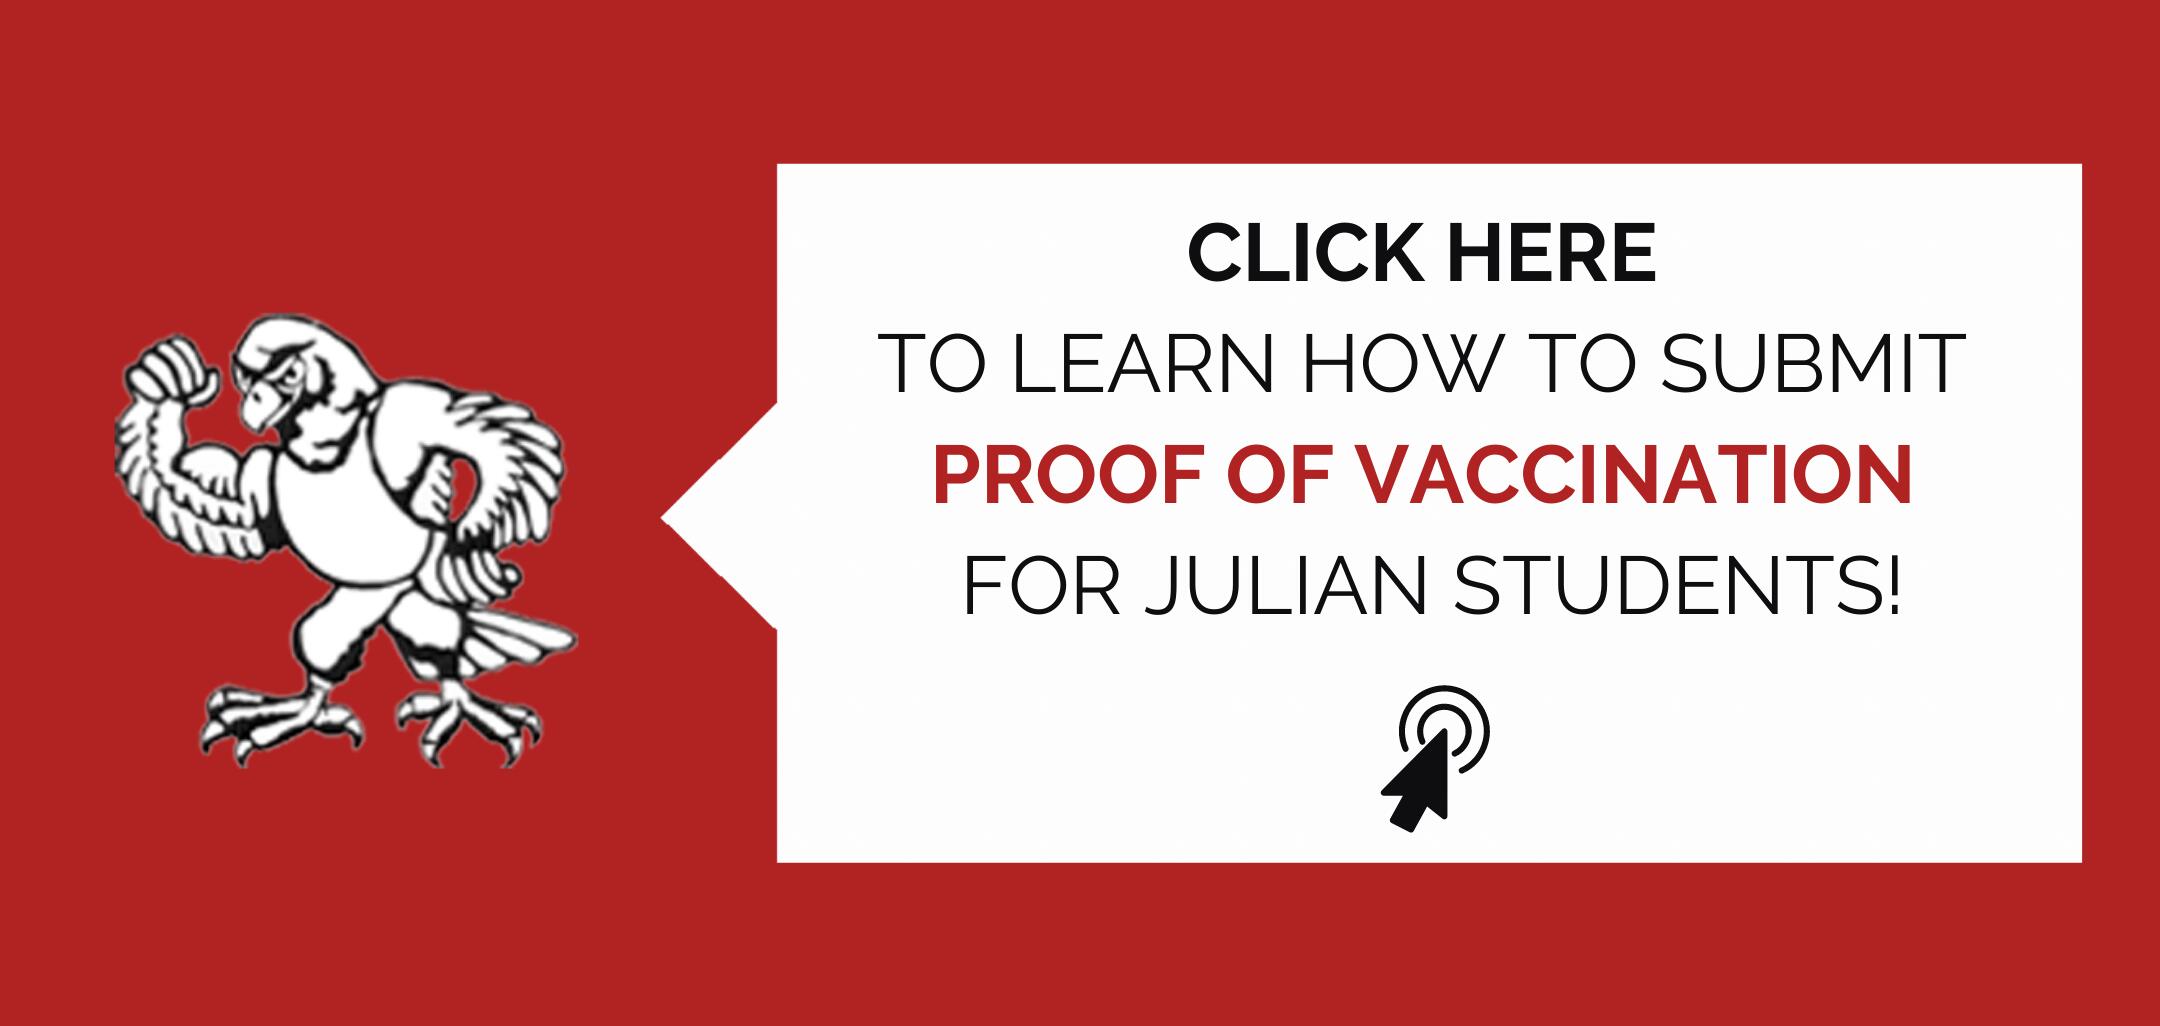 Click here to learn how to submit proof of vaccination for Julian students